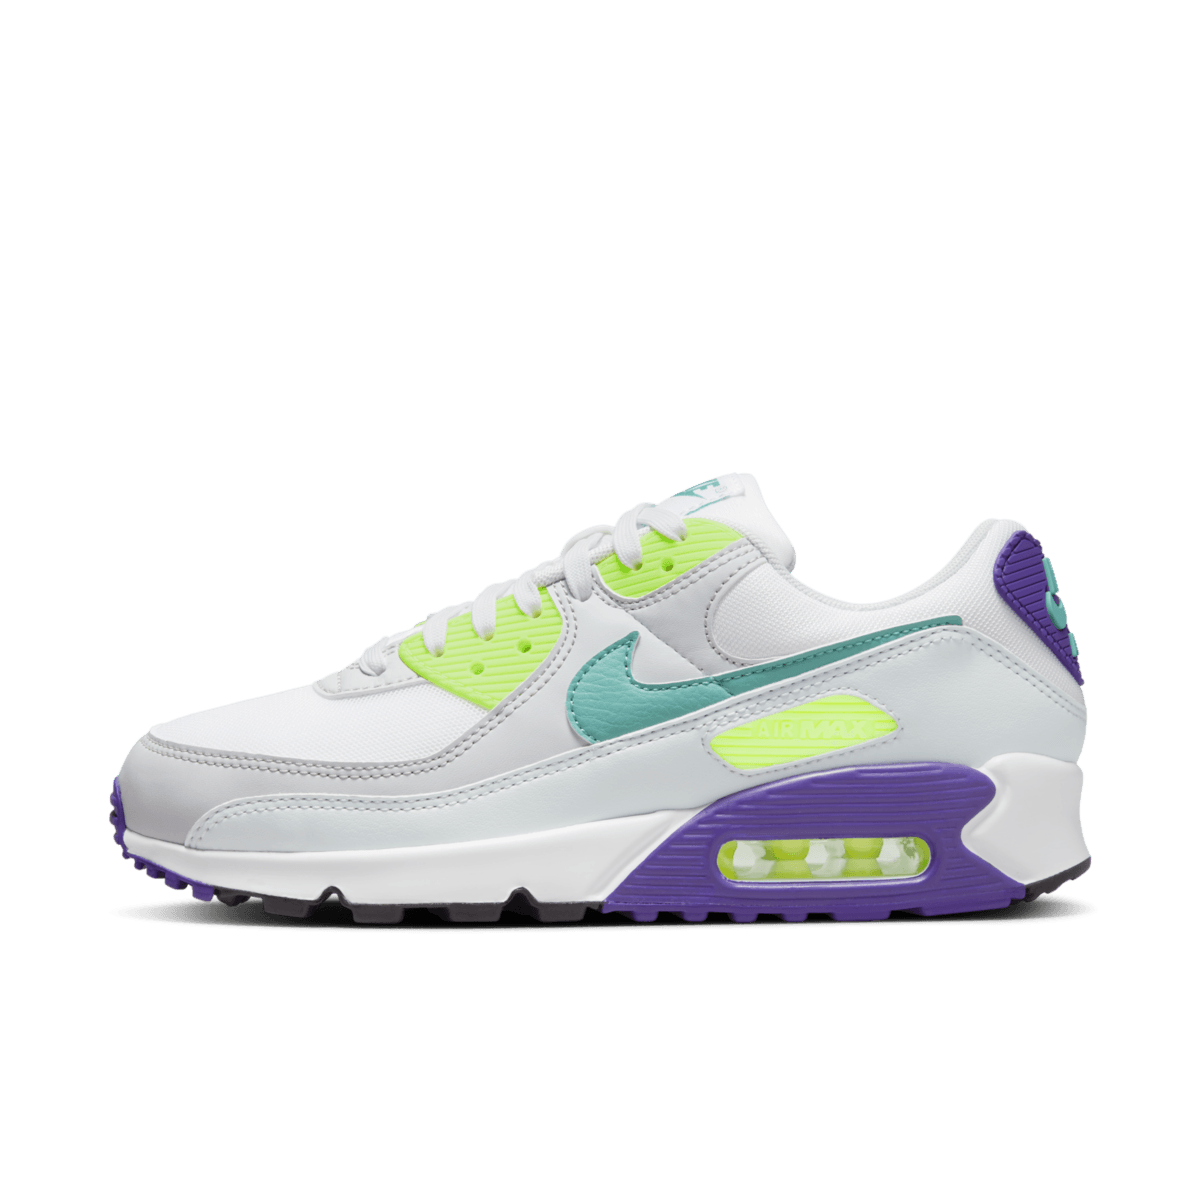 Nike WMNS Air Max 90 'Washed Teal' DH5072-100